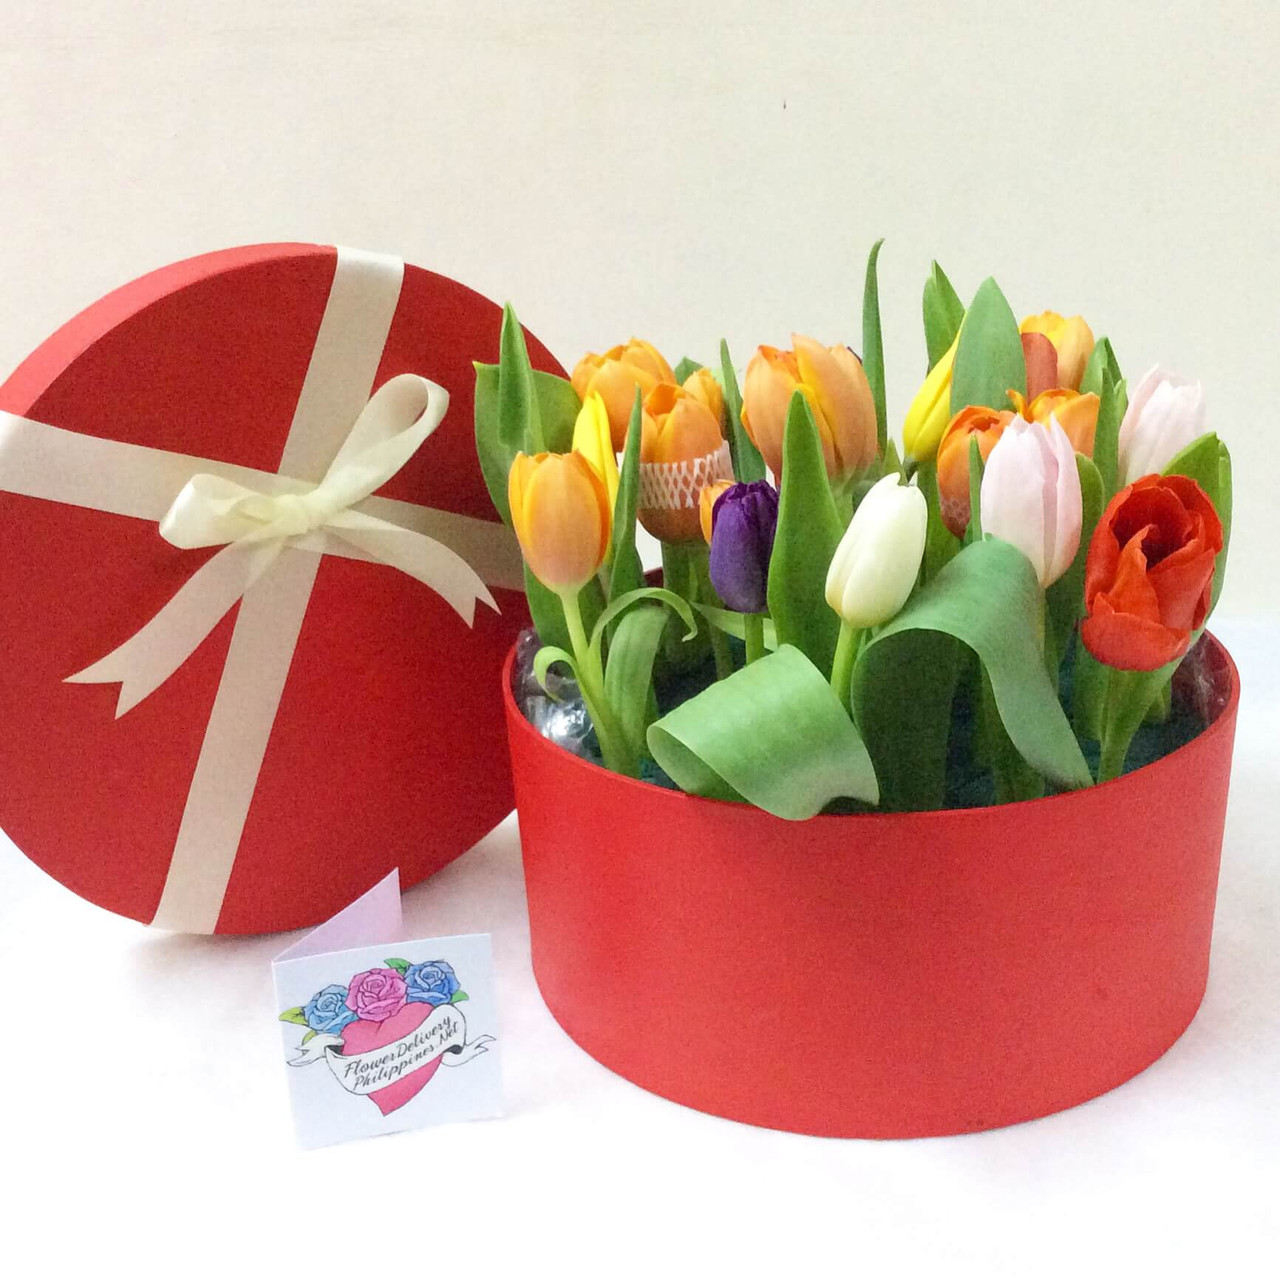 Assorted Tulips in a Box